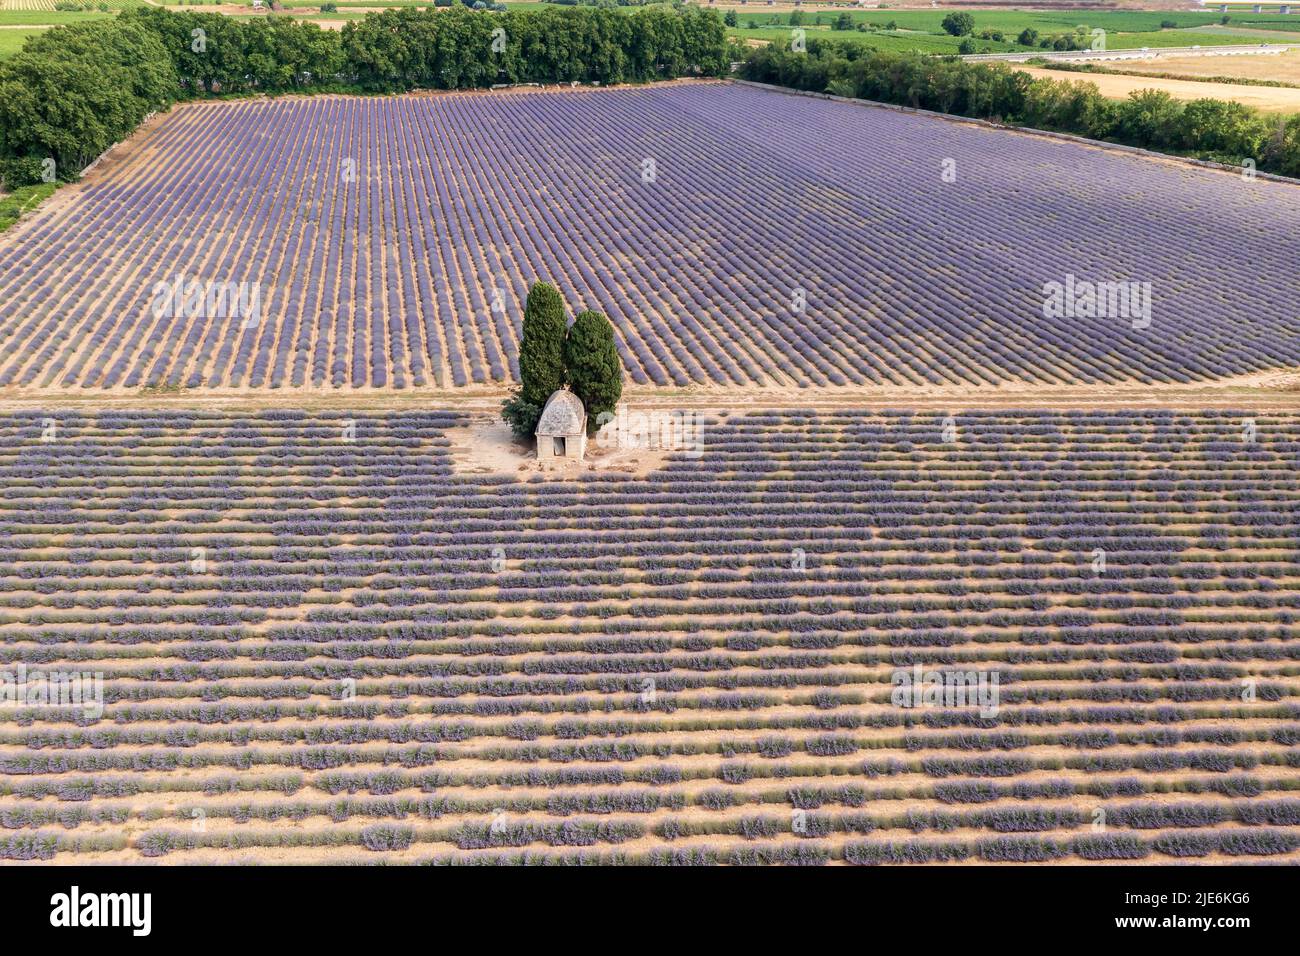 Aerial view of a lavender field in summer, near Aimargues, Occitanie, France Stock Photo